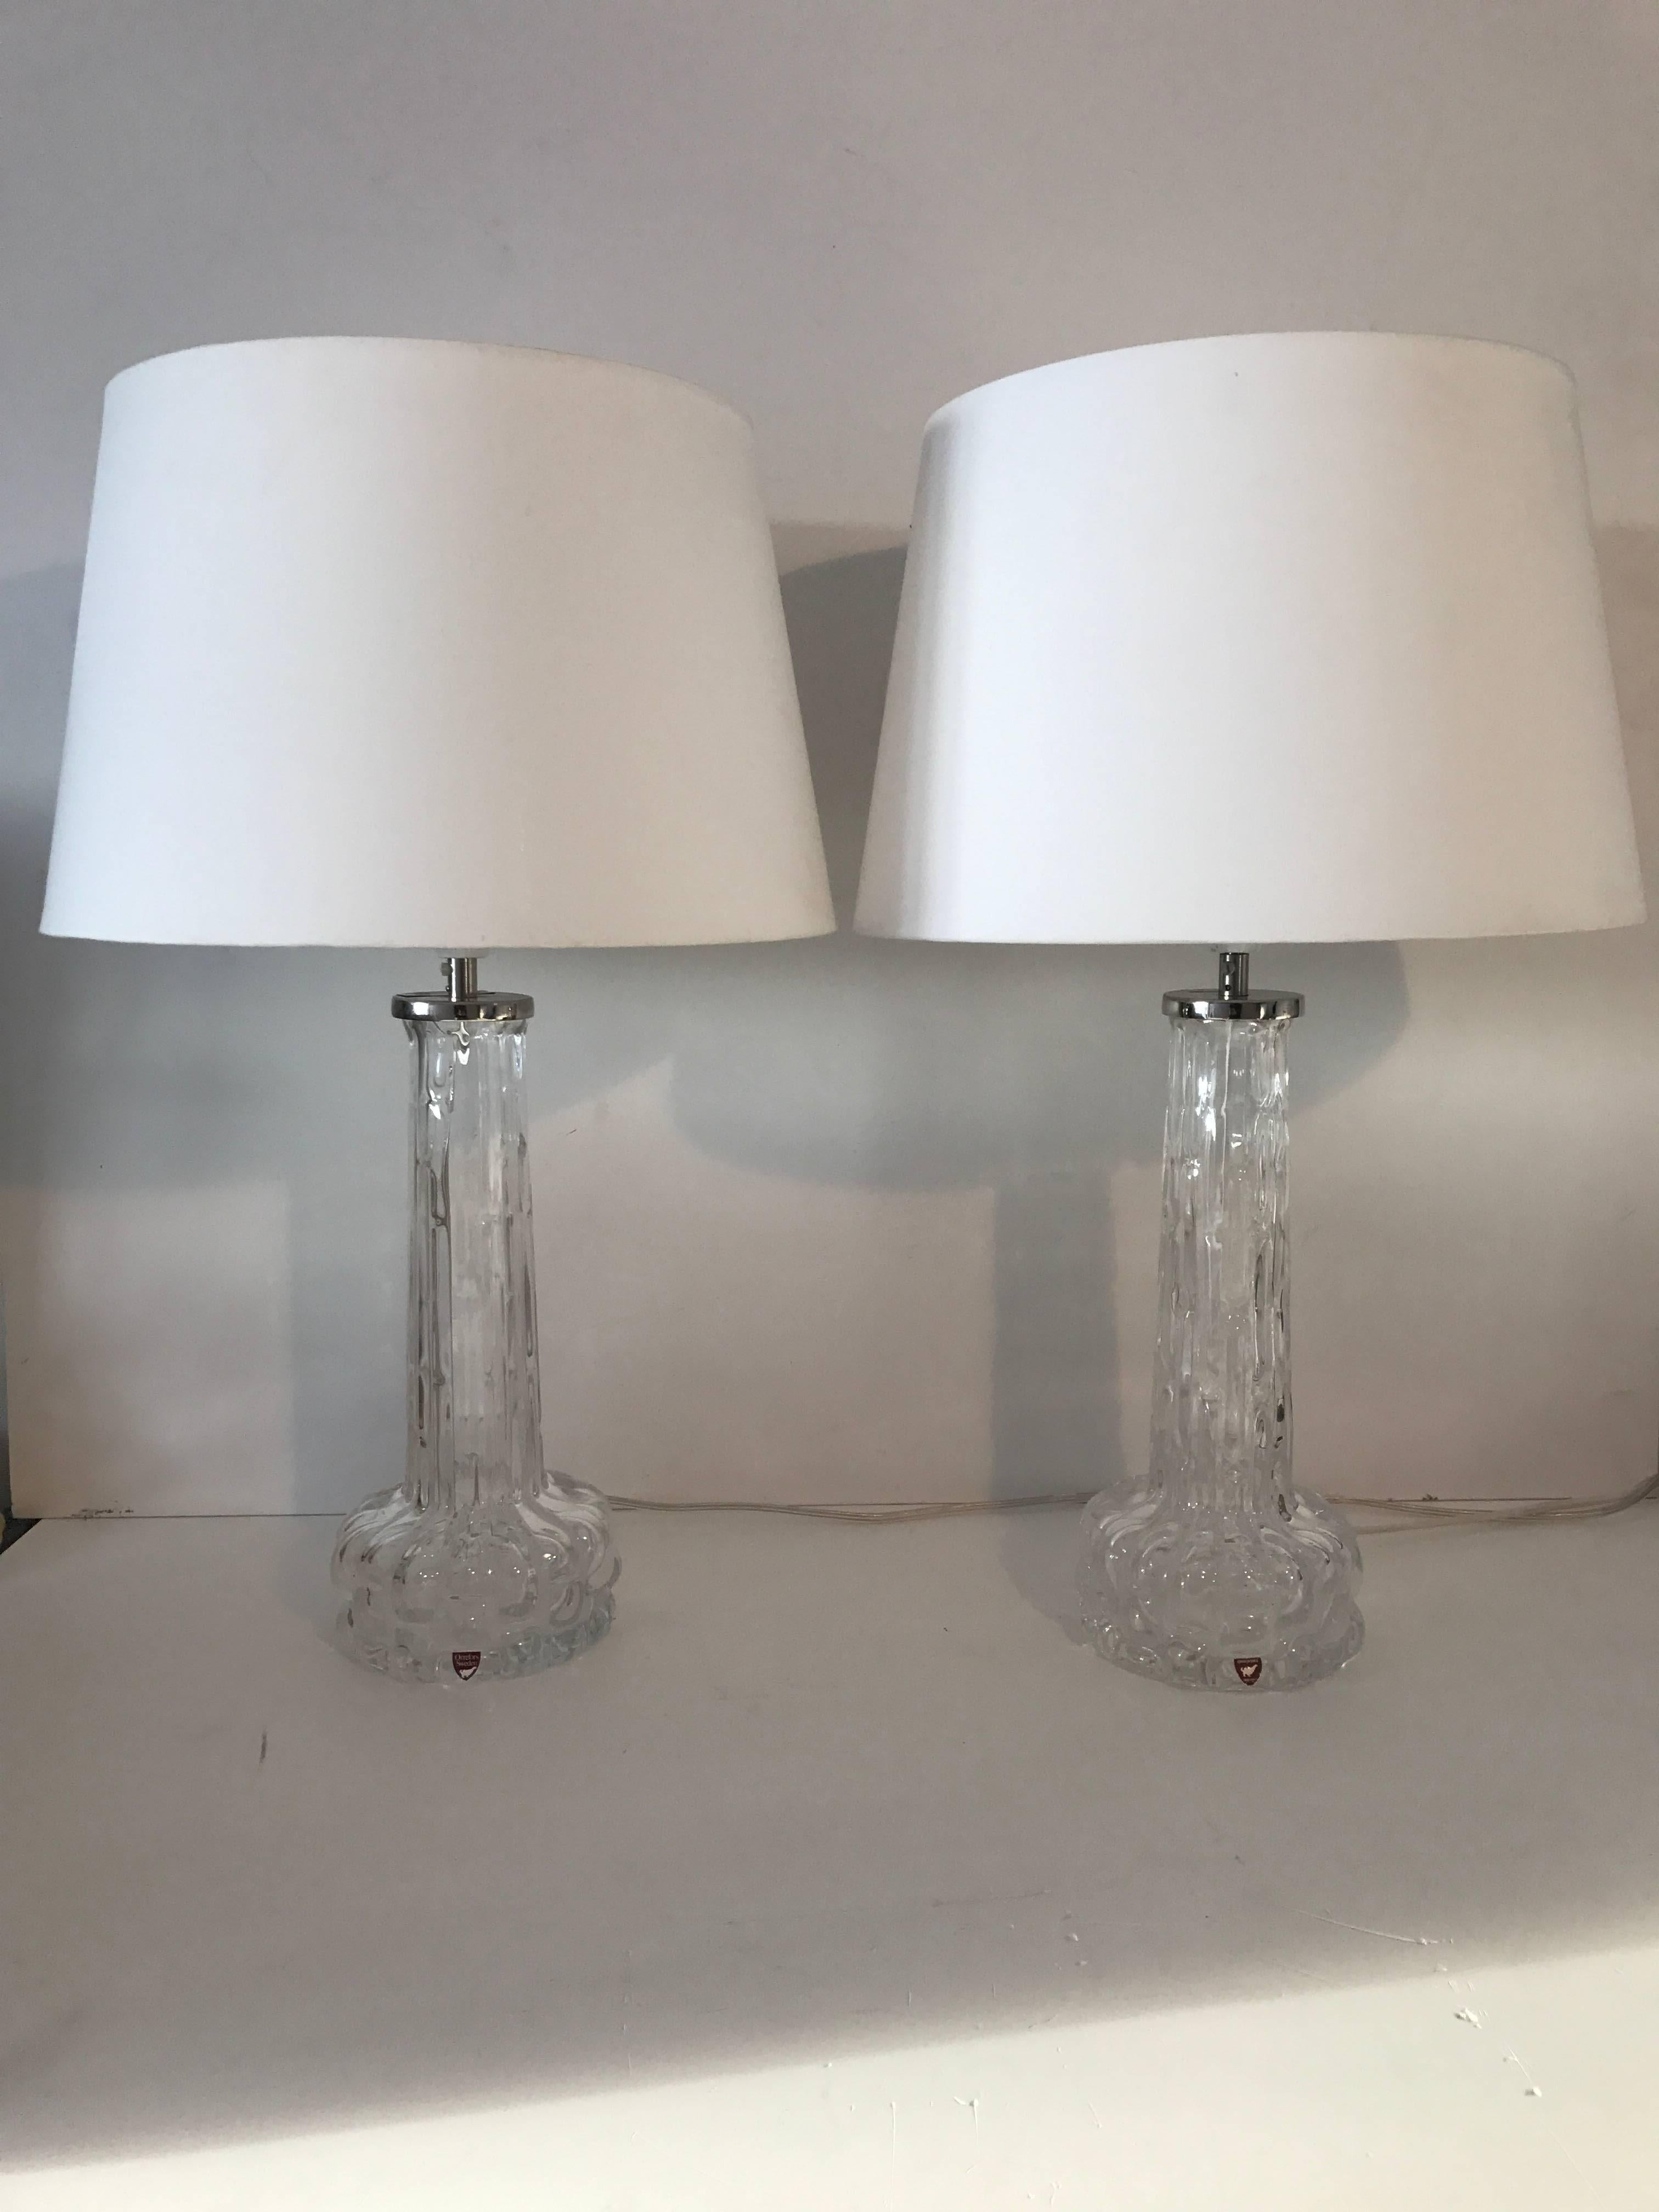 Swedish Orrefors 1955 Art Glass Table Lamps by Carl Fagerlund In Excellent Condition For Sale In Drottningholm, SE